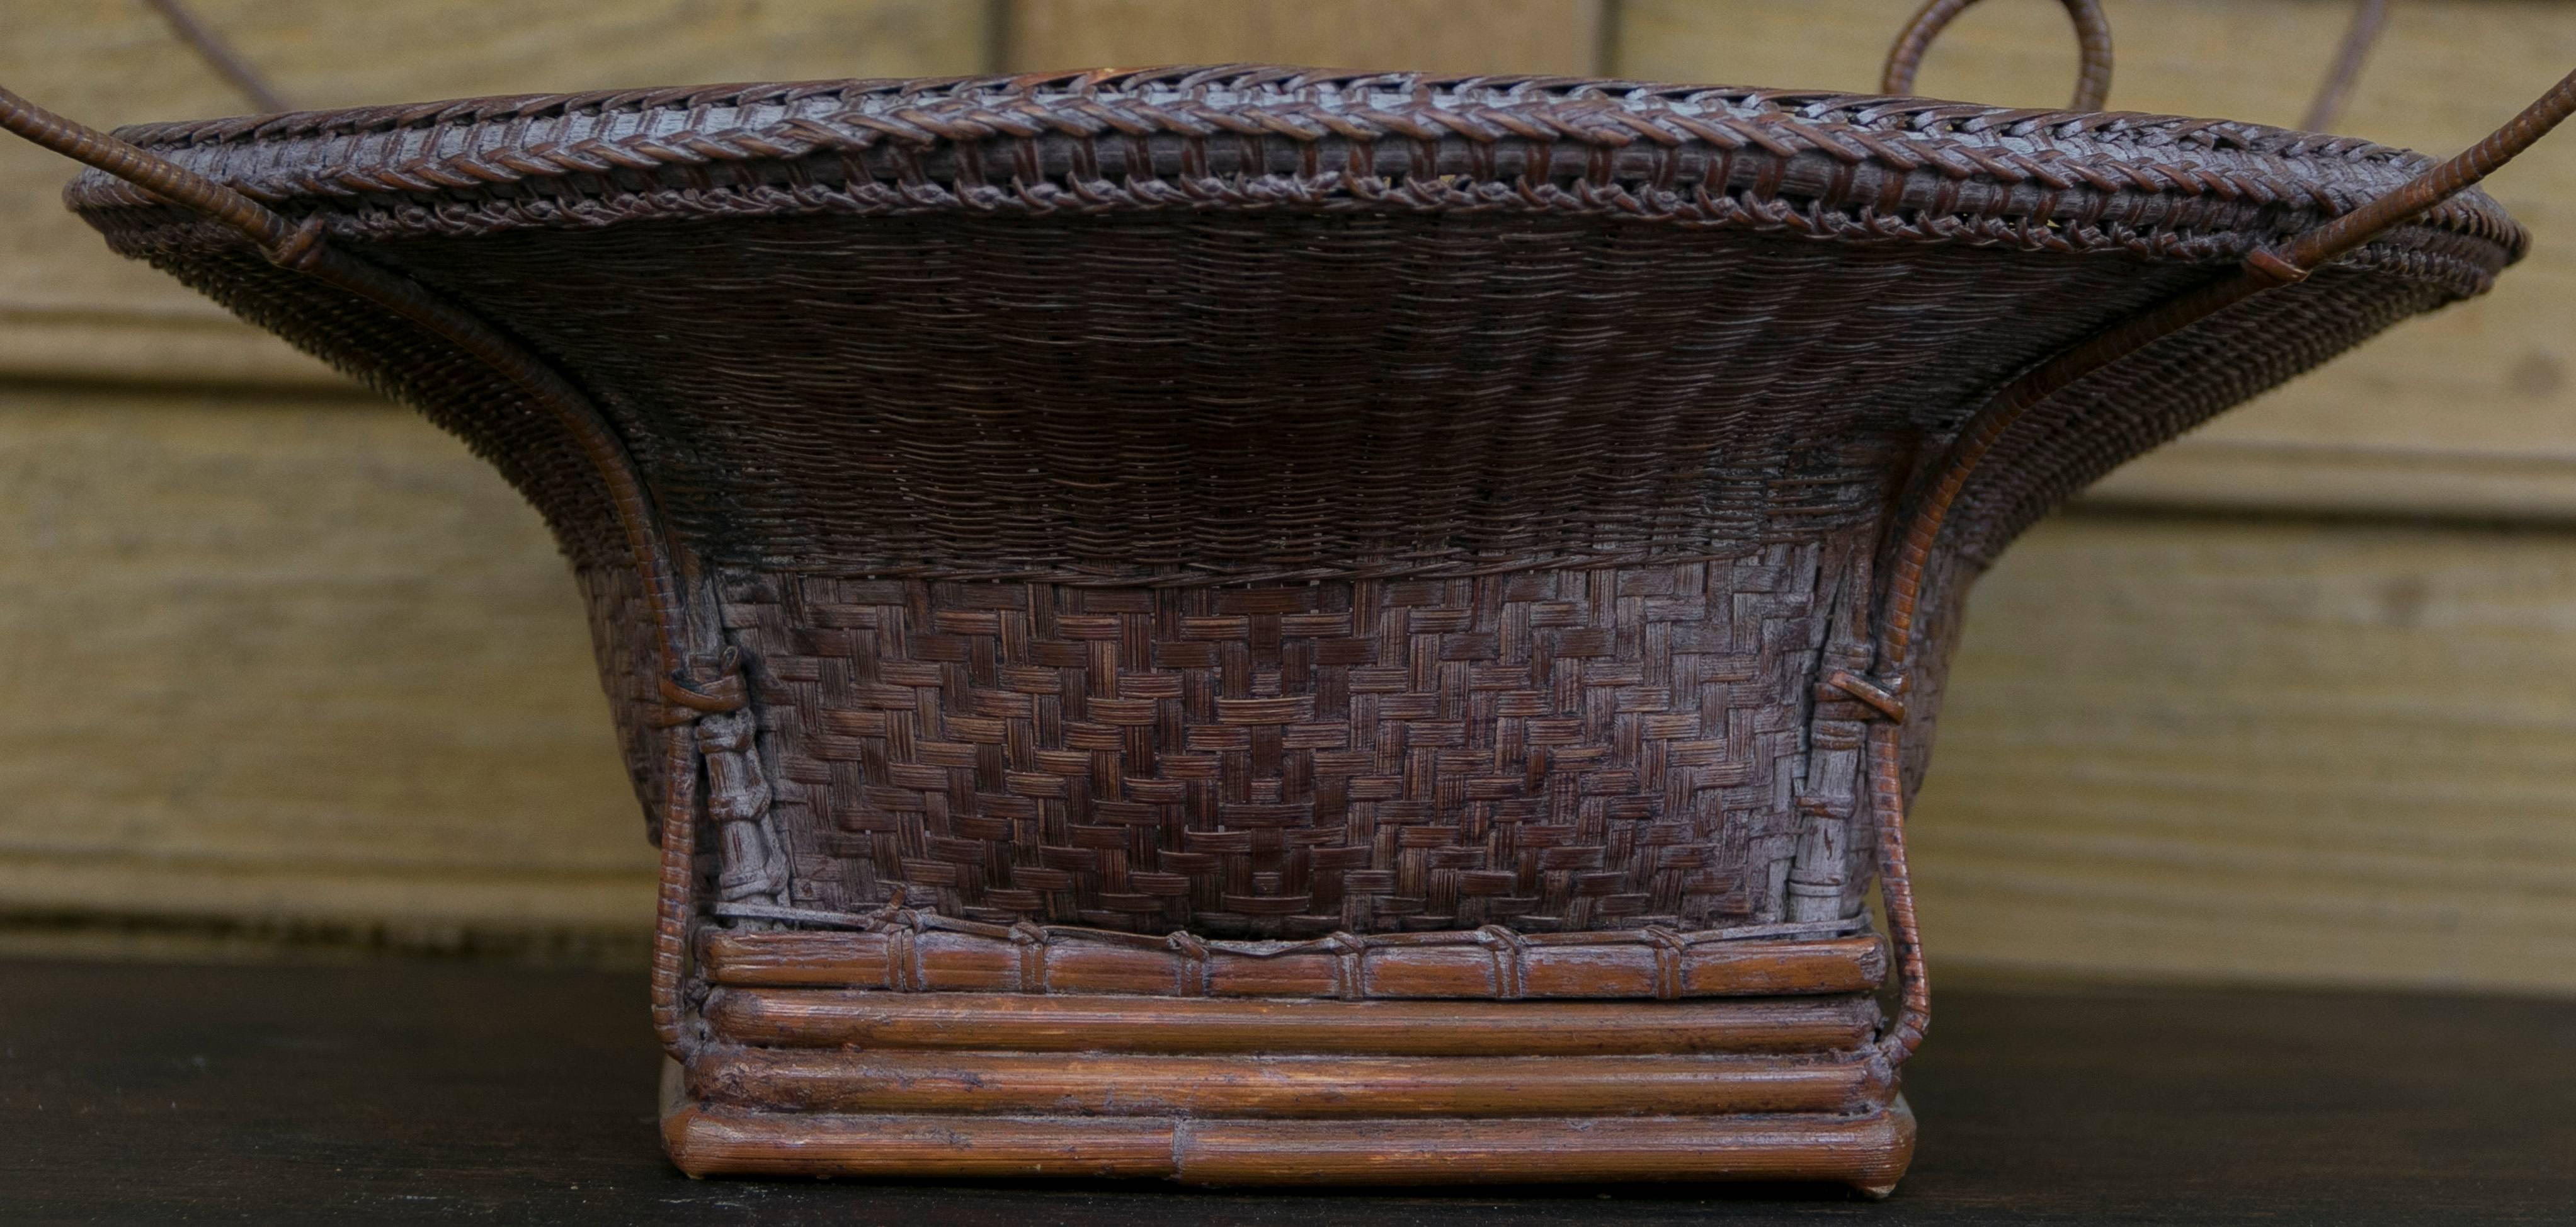 Rattan Early 20th Century Central Thai Finely Handwoven Basket with Handle For Sale